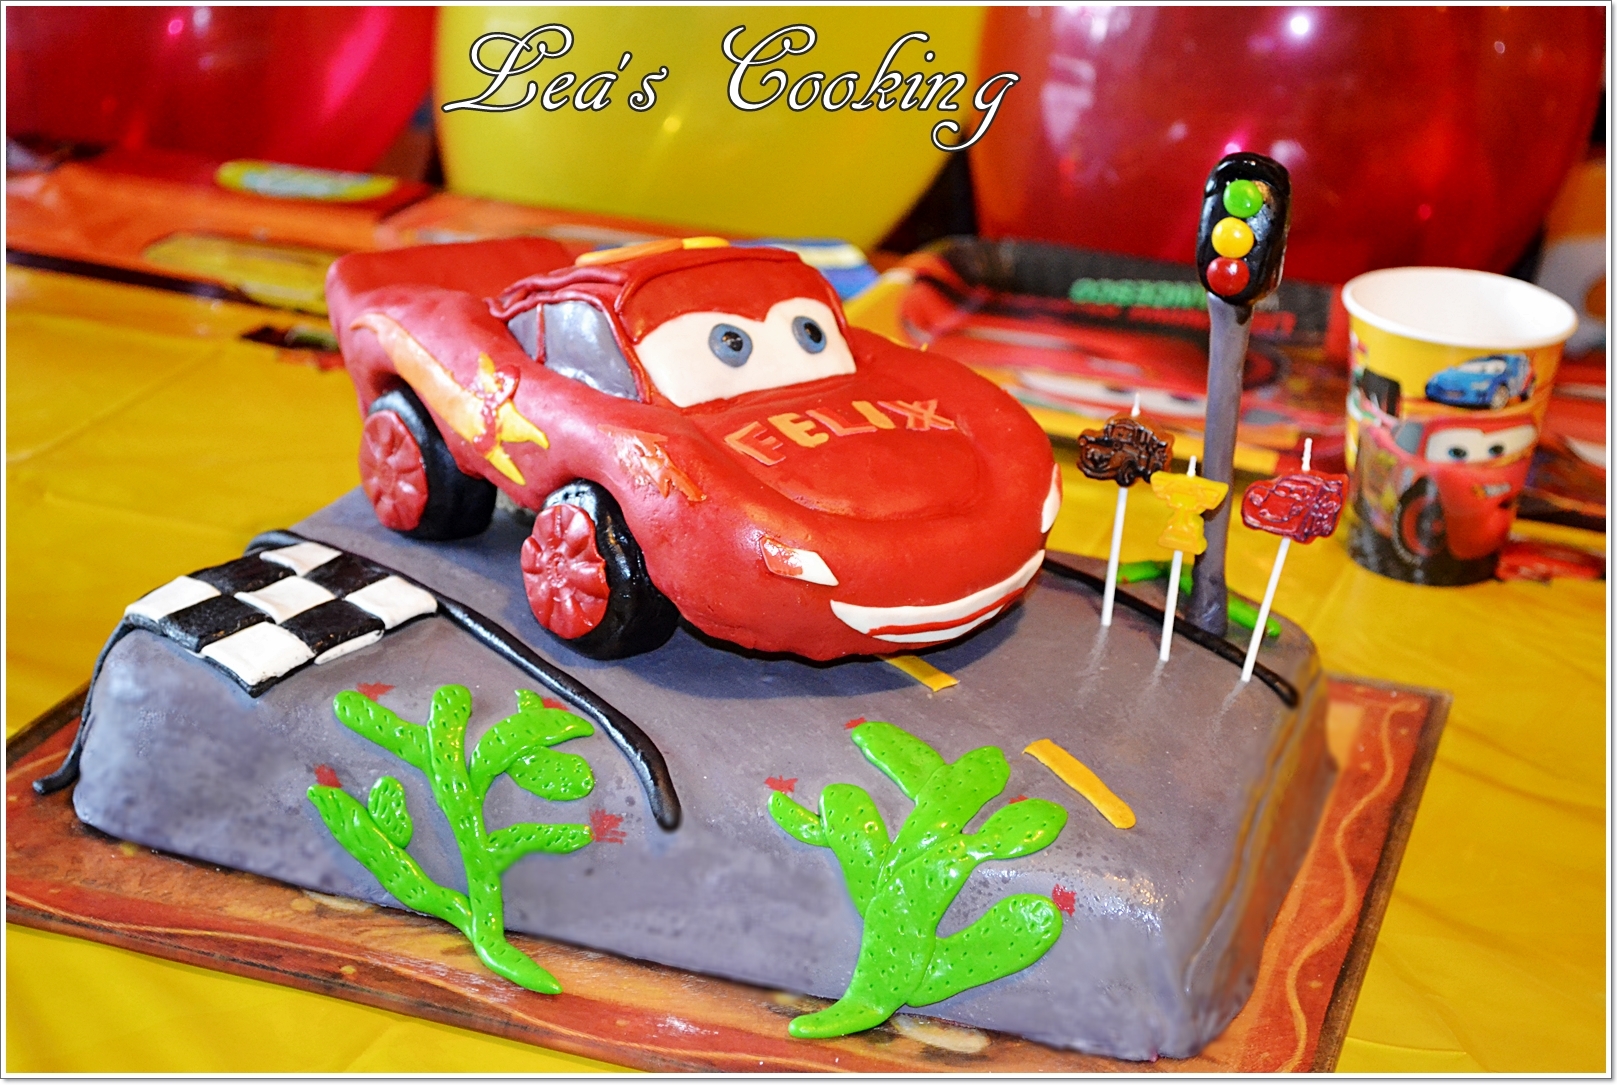 Inspired by Lightning McQueen from the Disney Movie "Cars". Make your kid's birthday cake special. Make a car cake by following these step-by-step instructions at my blog http://leascooking.blogspot.com/2013/01/cars-lightning-mcqueen-cake-topper.html